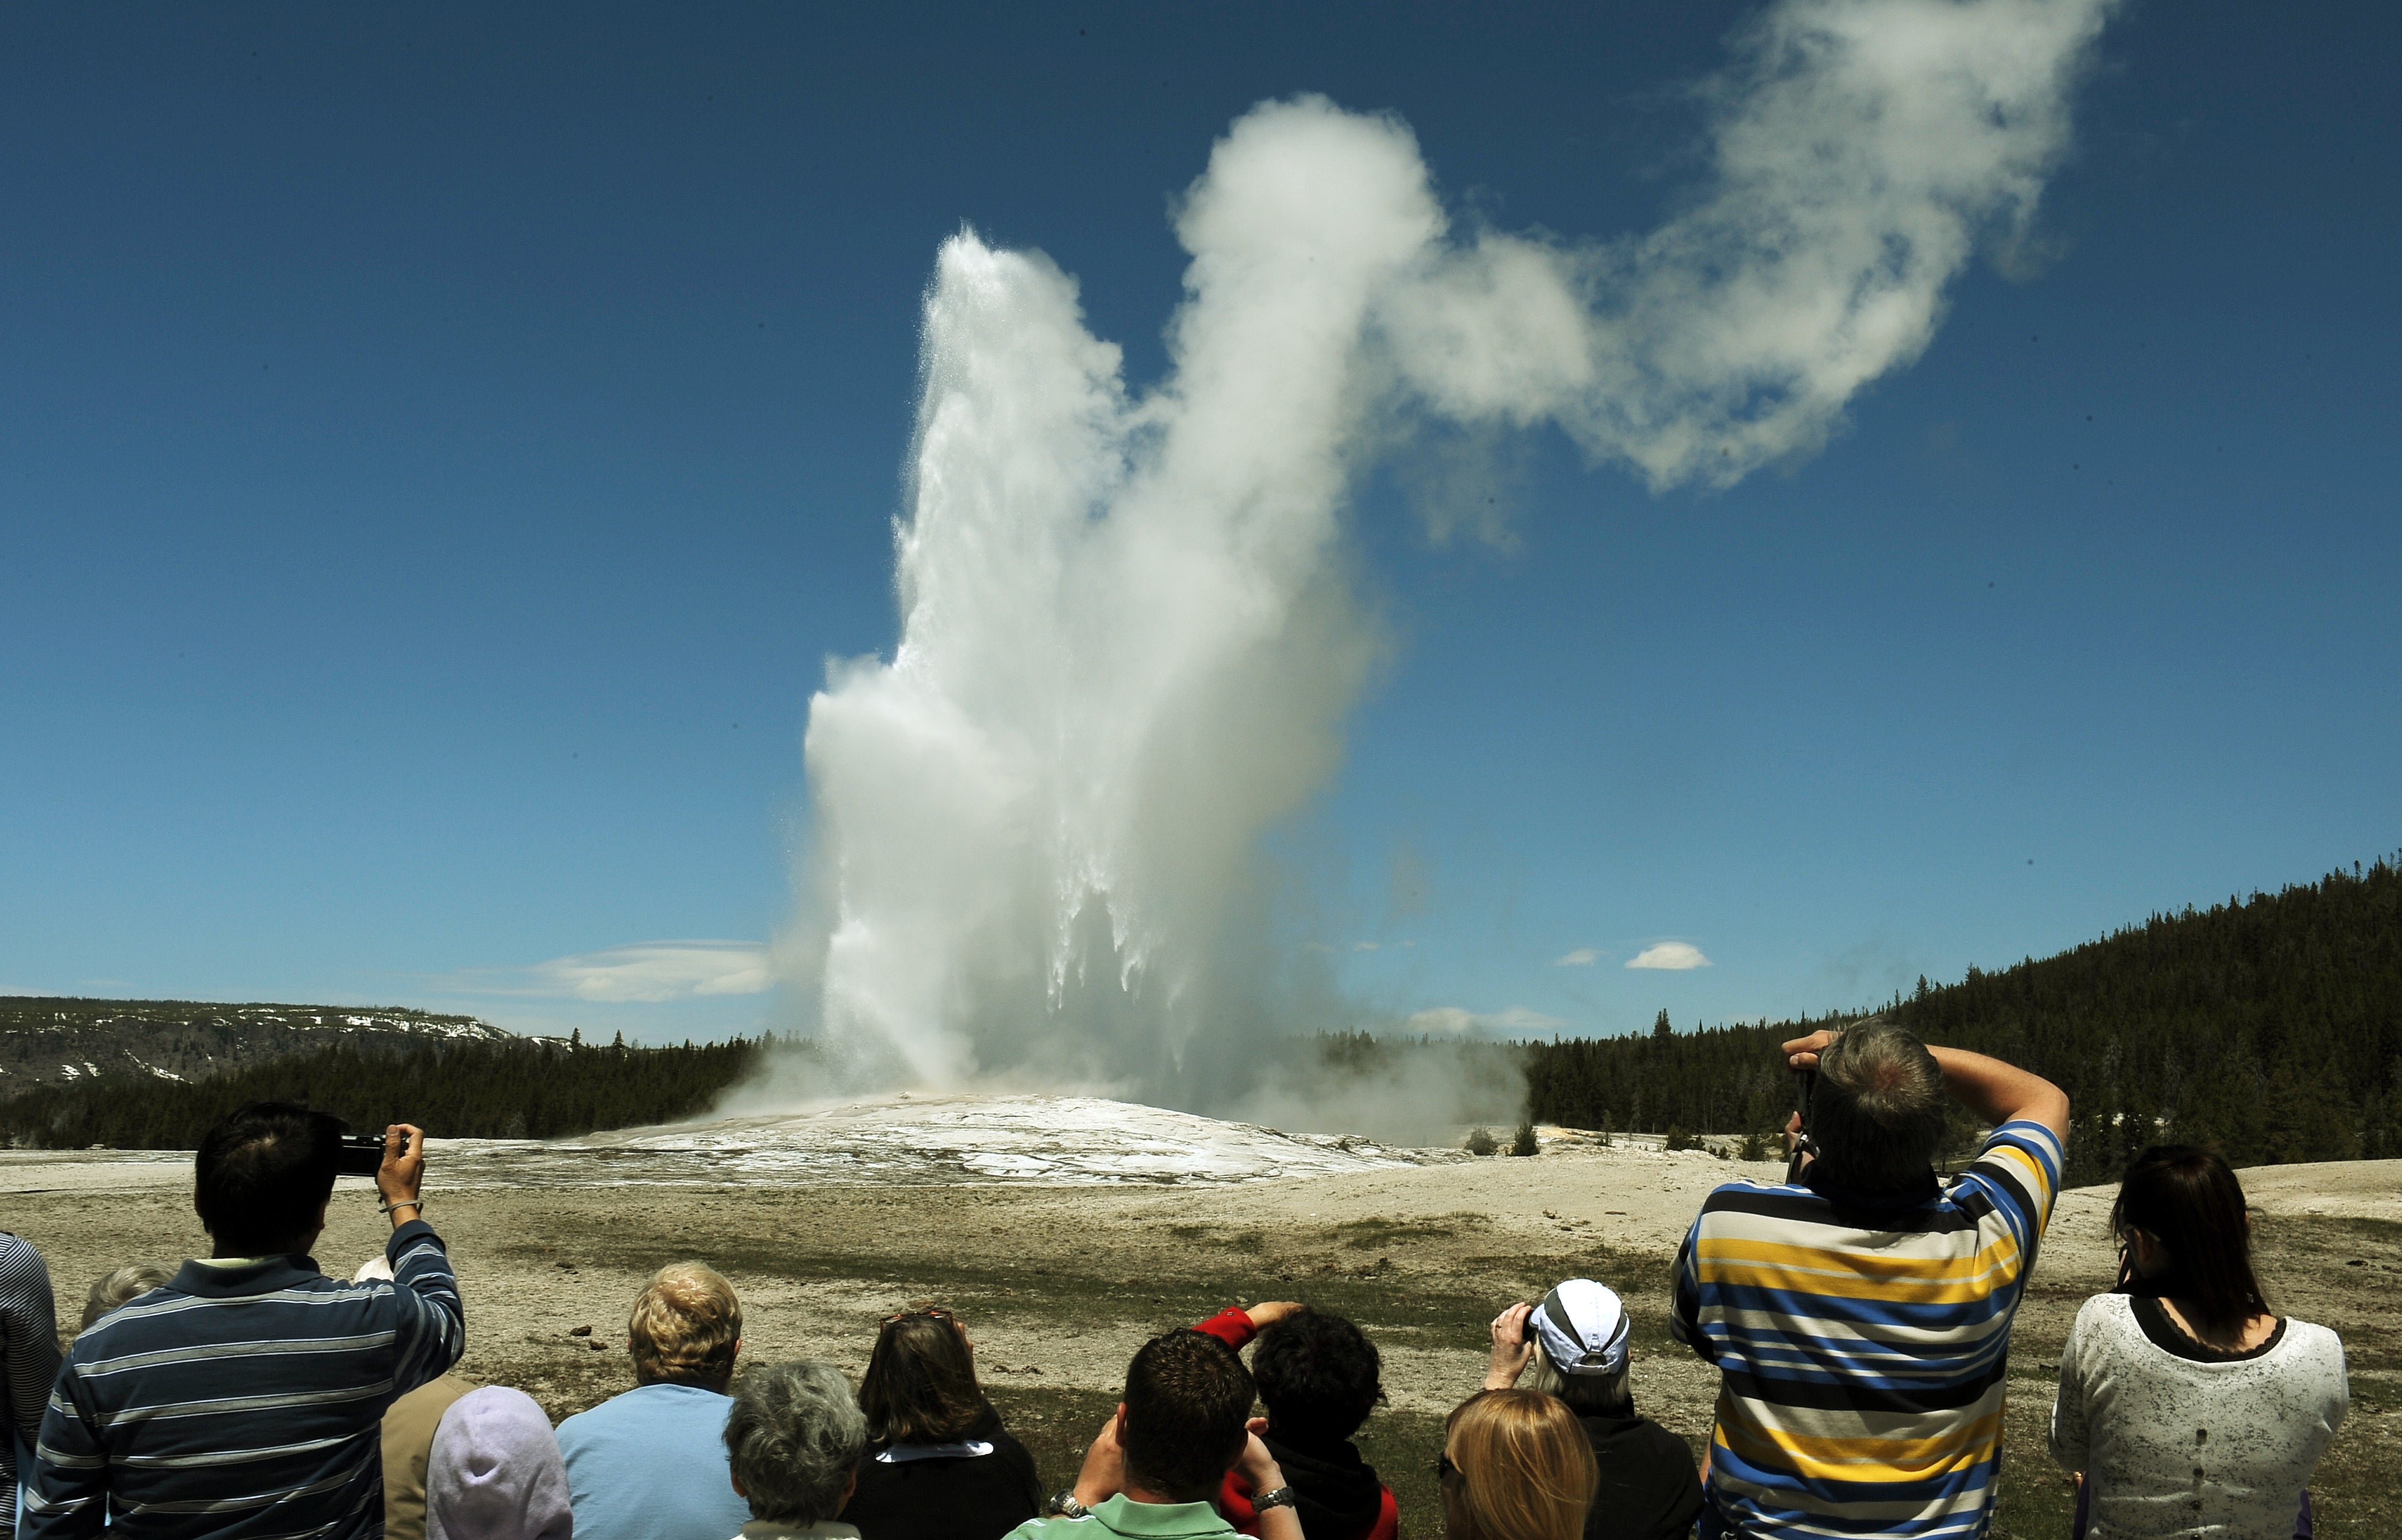 Yellowstone's 'Old Faithful' geyser erupts around every 90 minutes. Photo from June 1, 2011. (Photo: MARK RALSTON/AFP, Getty Images)